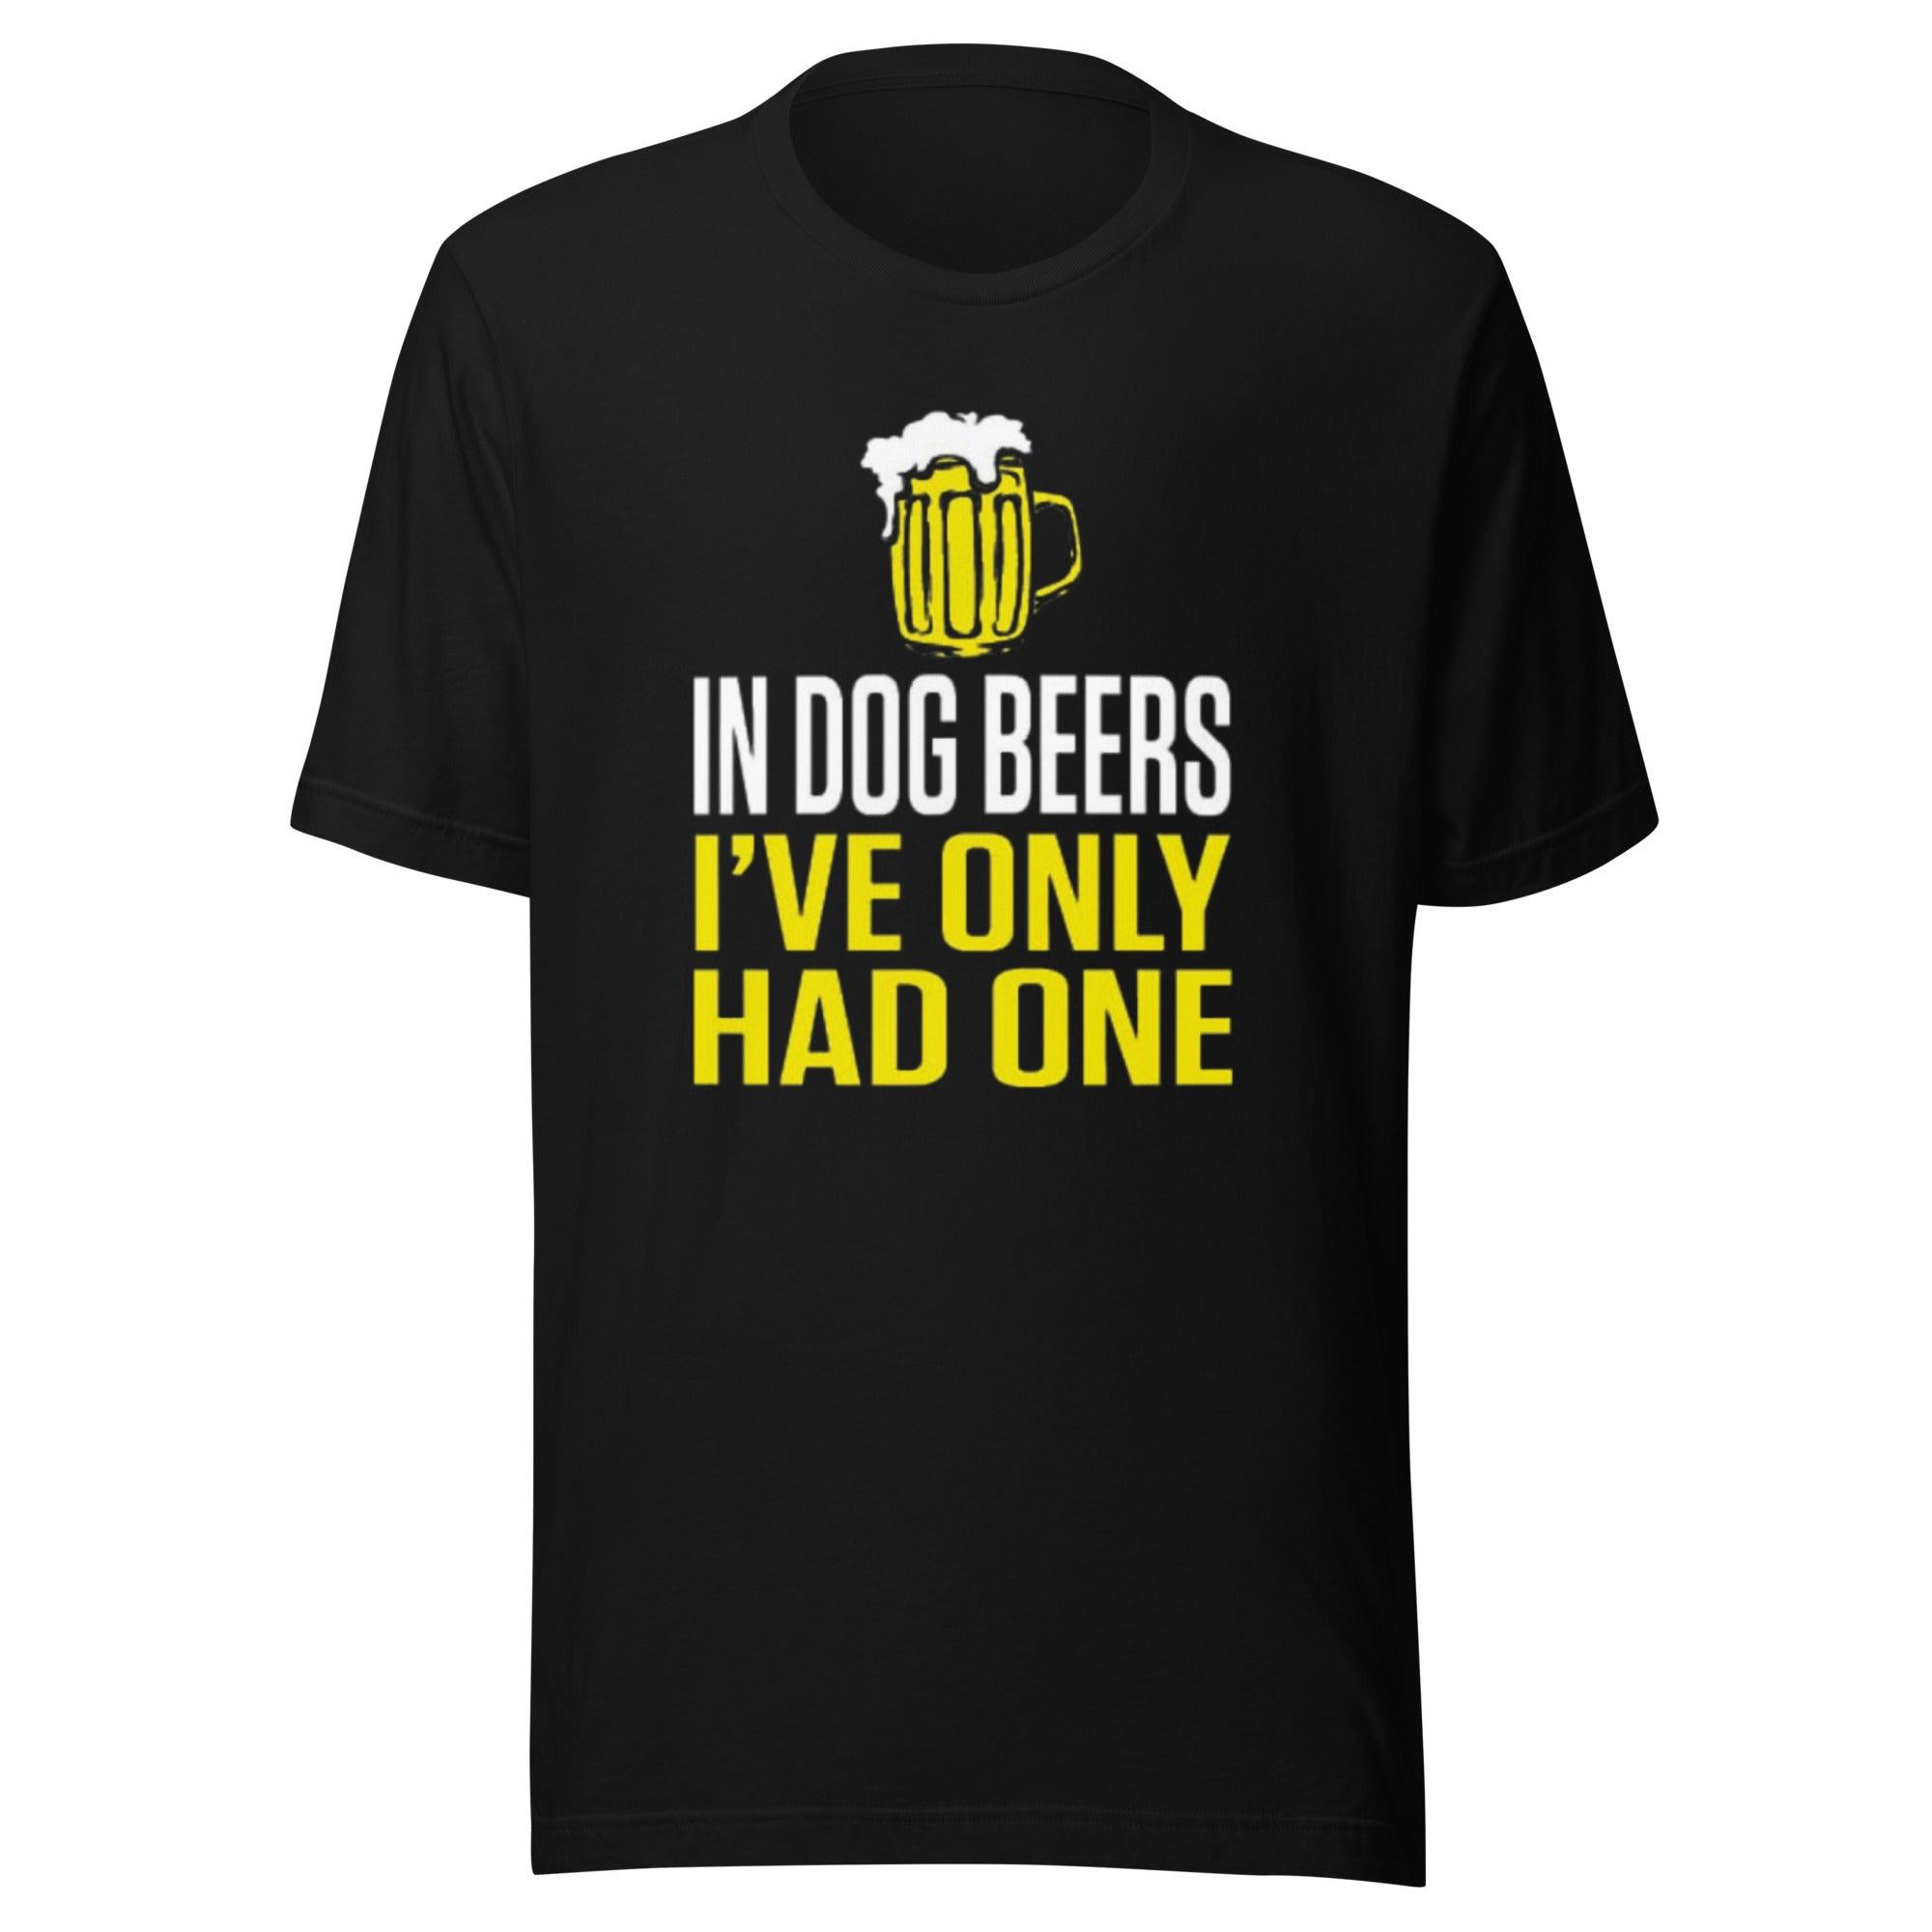 Drinking T-shirt In Dog Beers I Only Had One Short Sleeve 100% Ultra Soft Cotton Unisex Crewneck Top